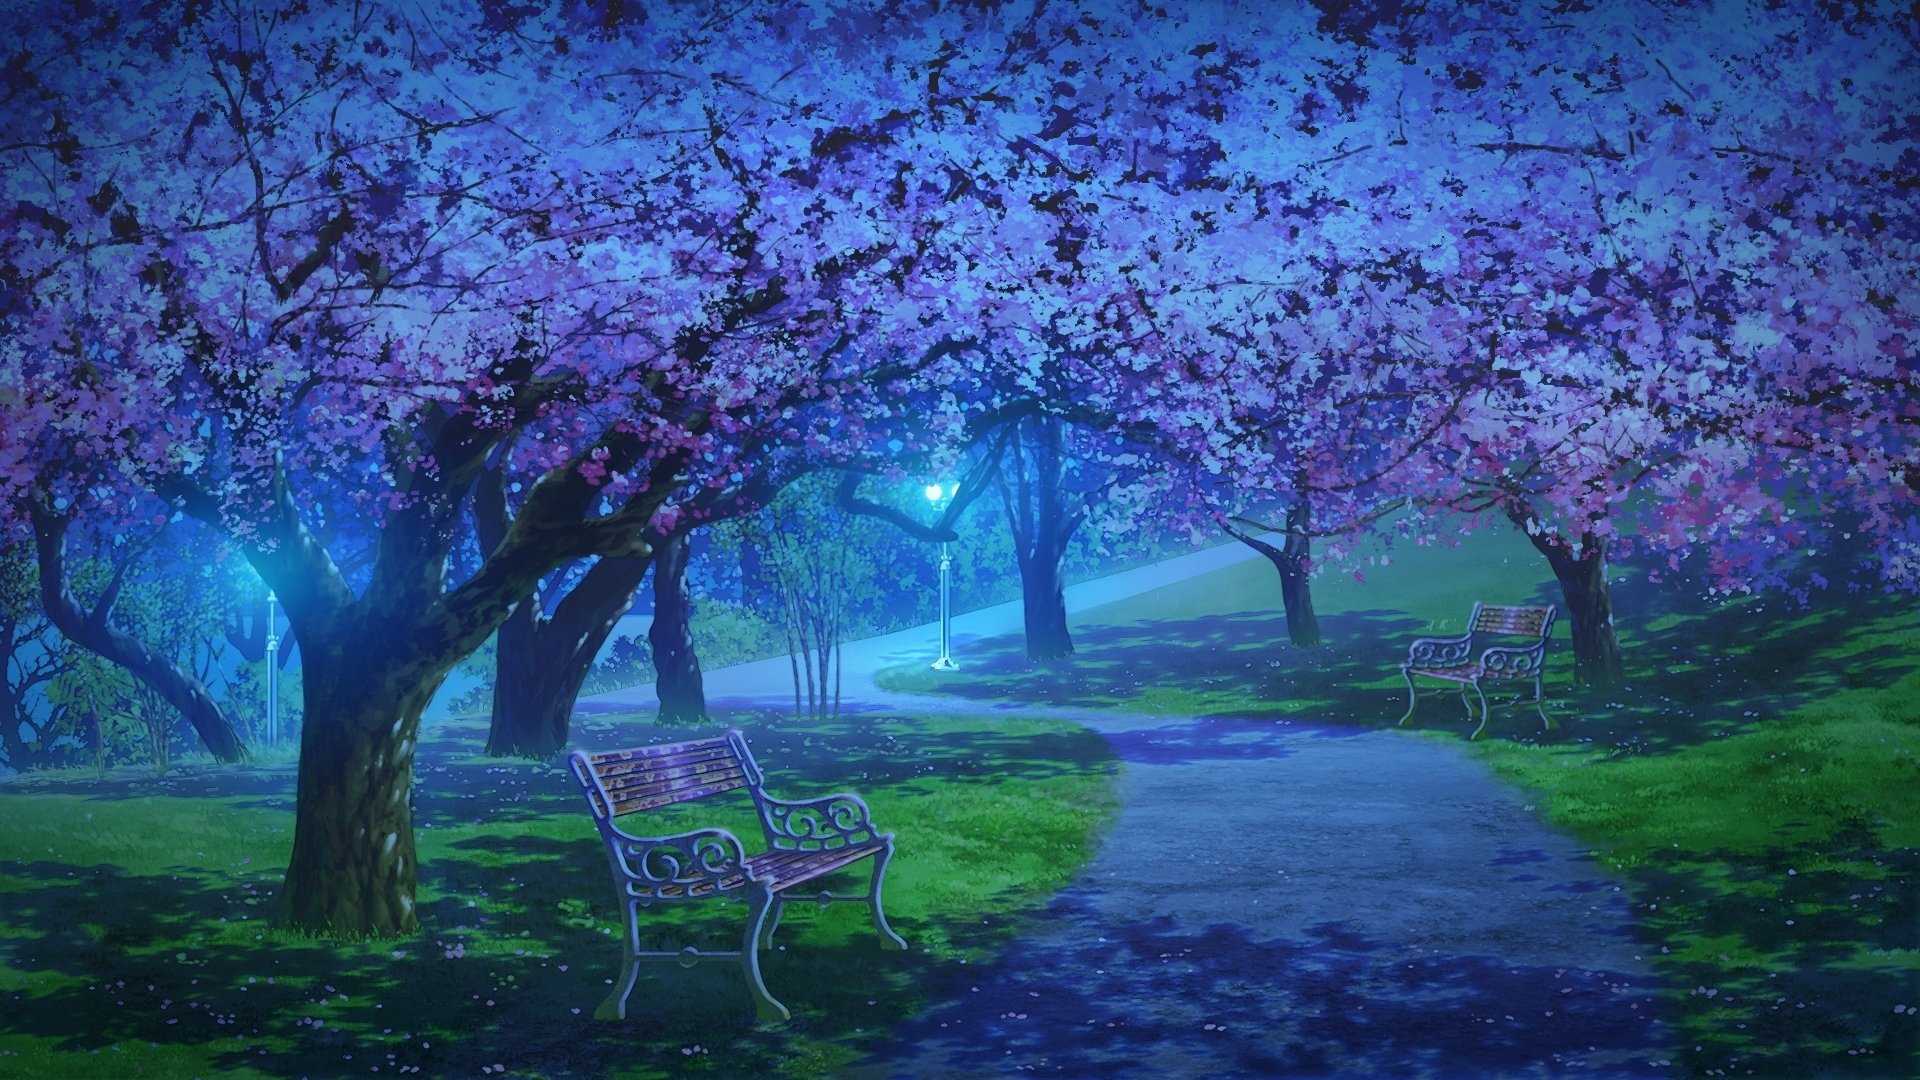 1172 Park Anime Photos Pictures And Background Images For Free Download   Pngtree